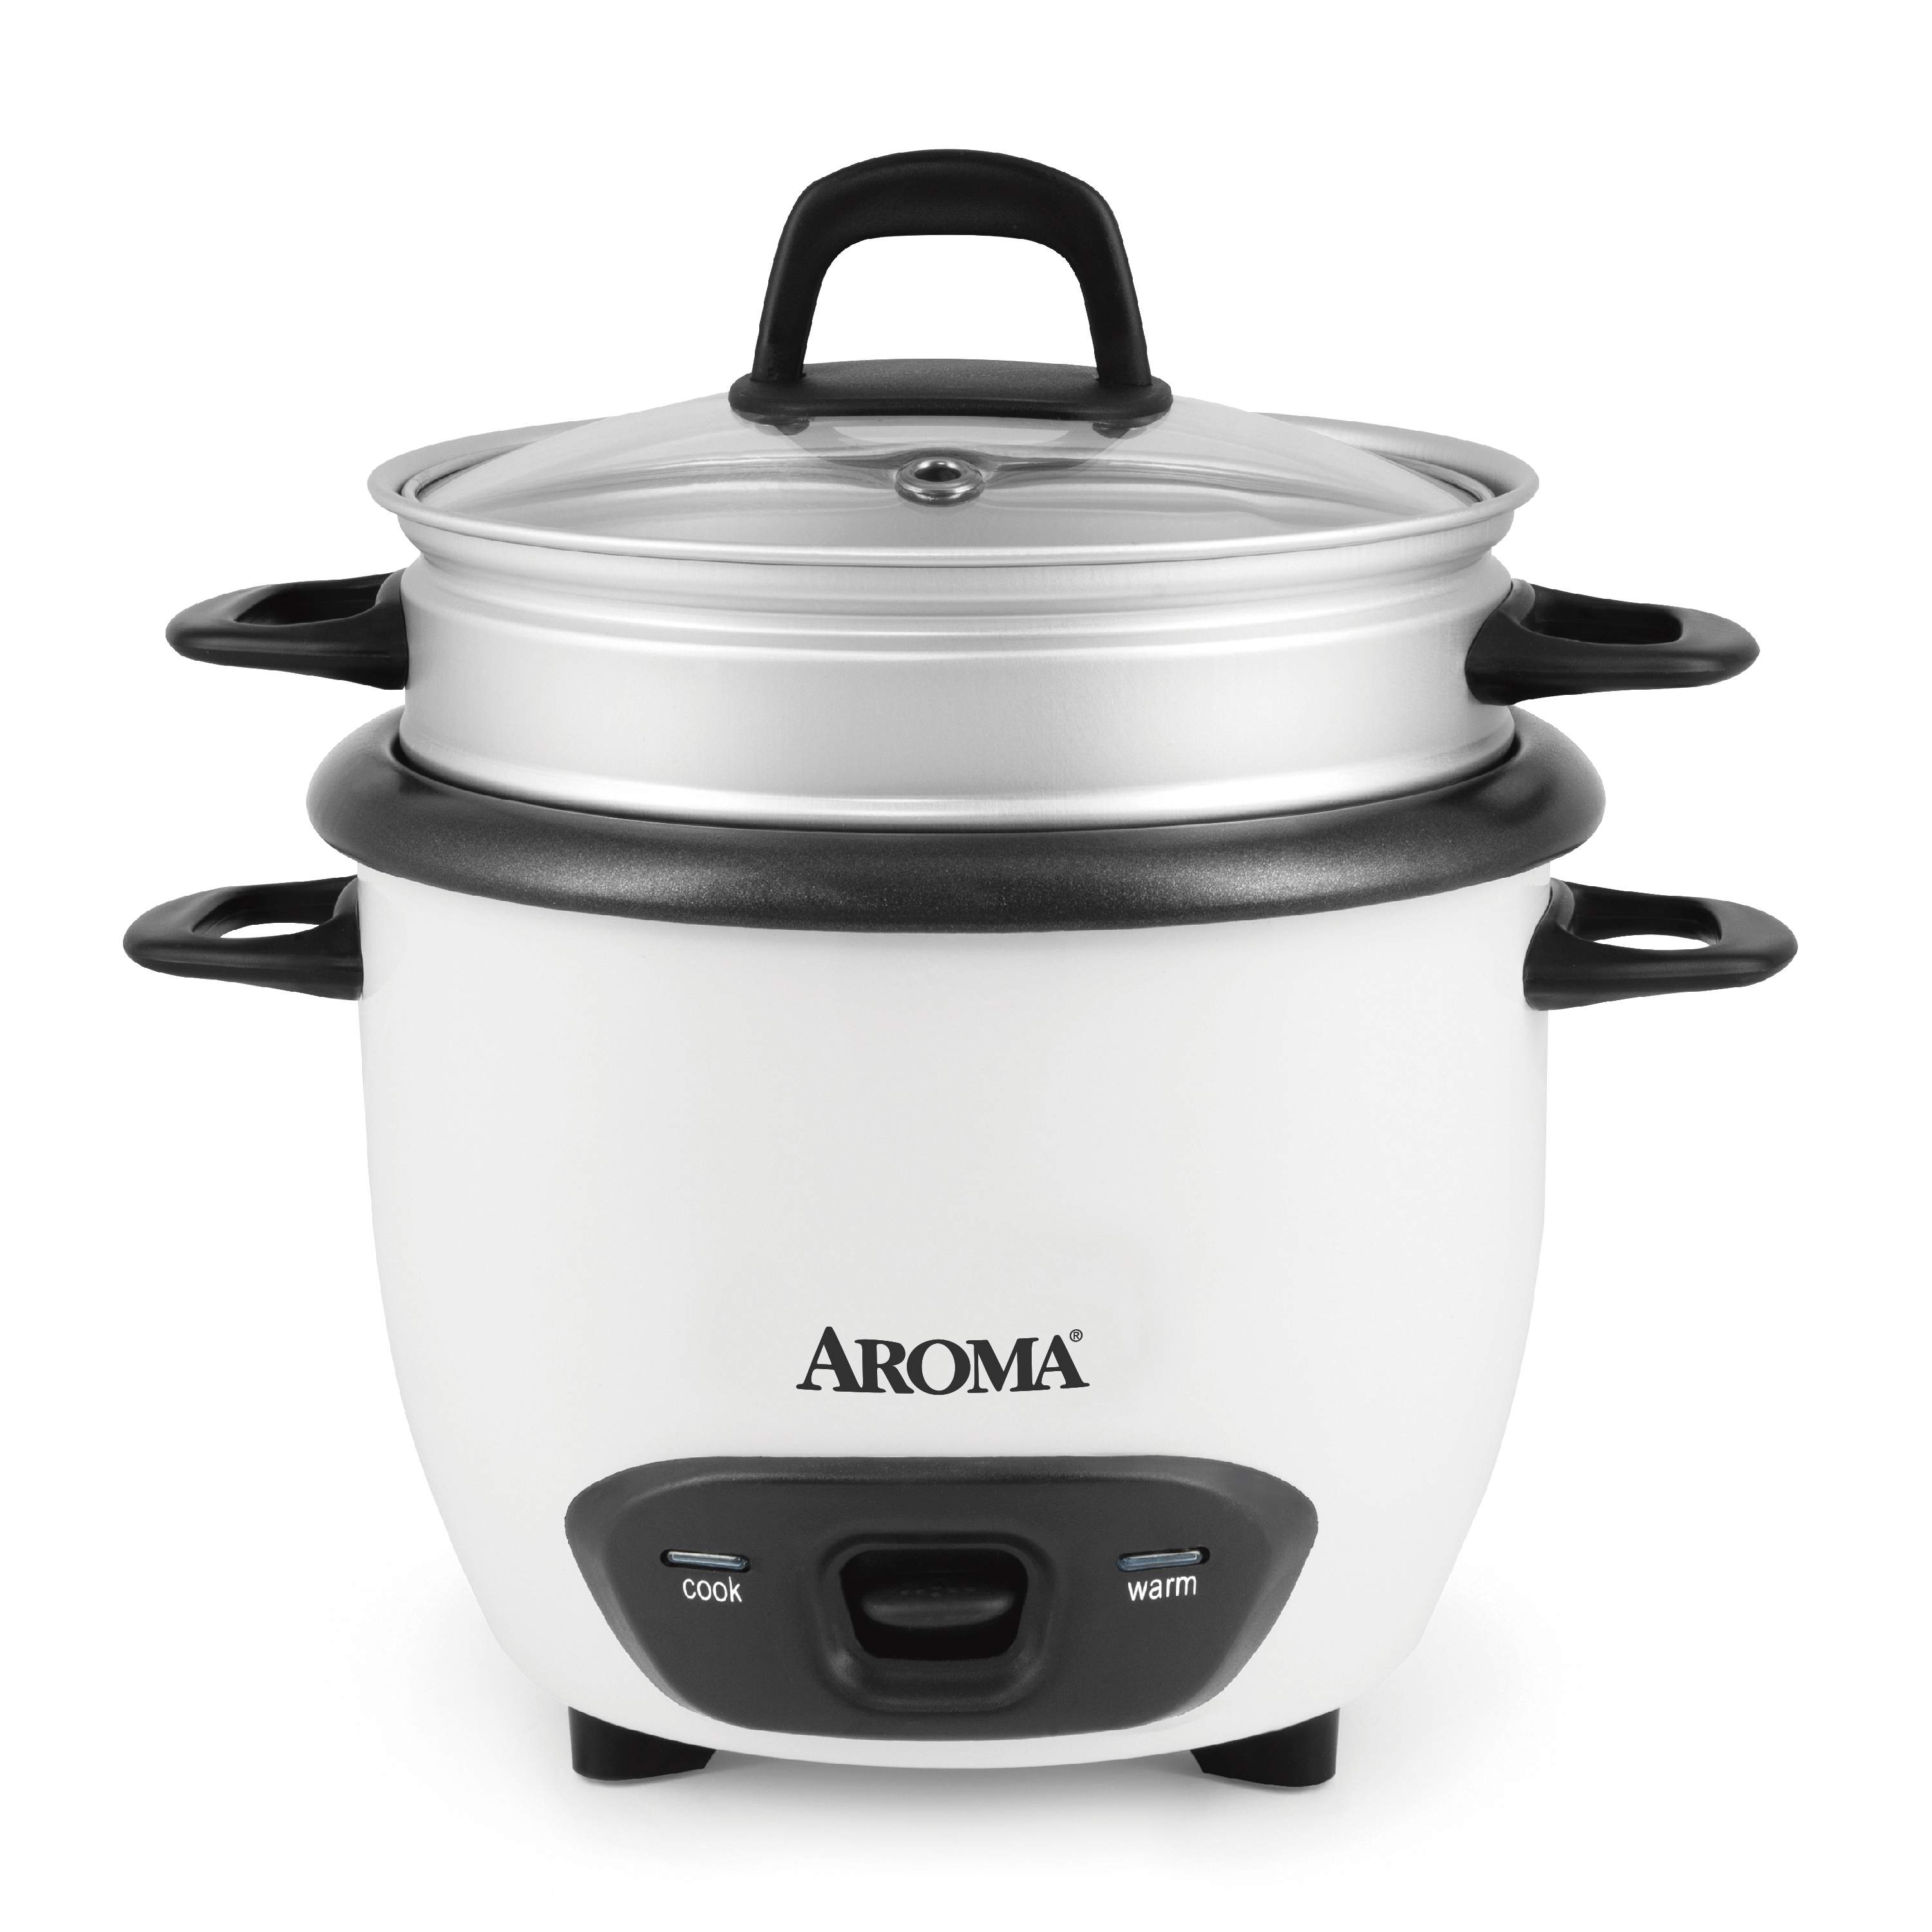 Aroma® 6-Cup (Cooked) / 1.5Qt. Rice & Grain Cooker, White, New, ARC-743-1NG - image 1 of 5